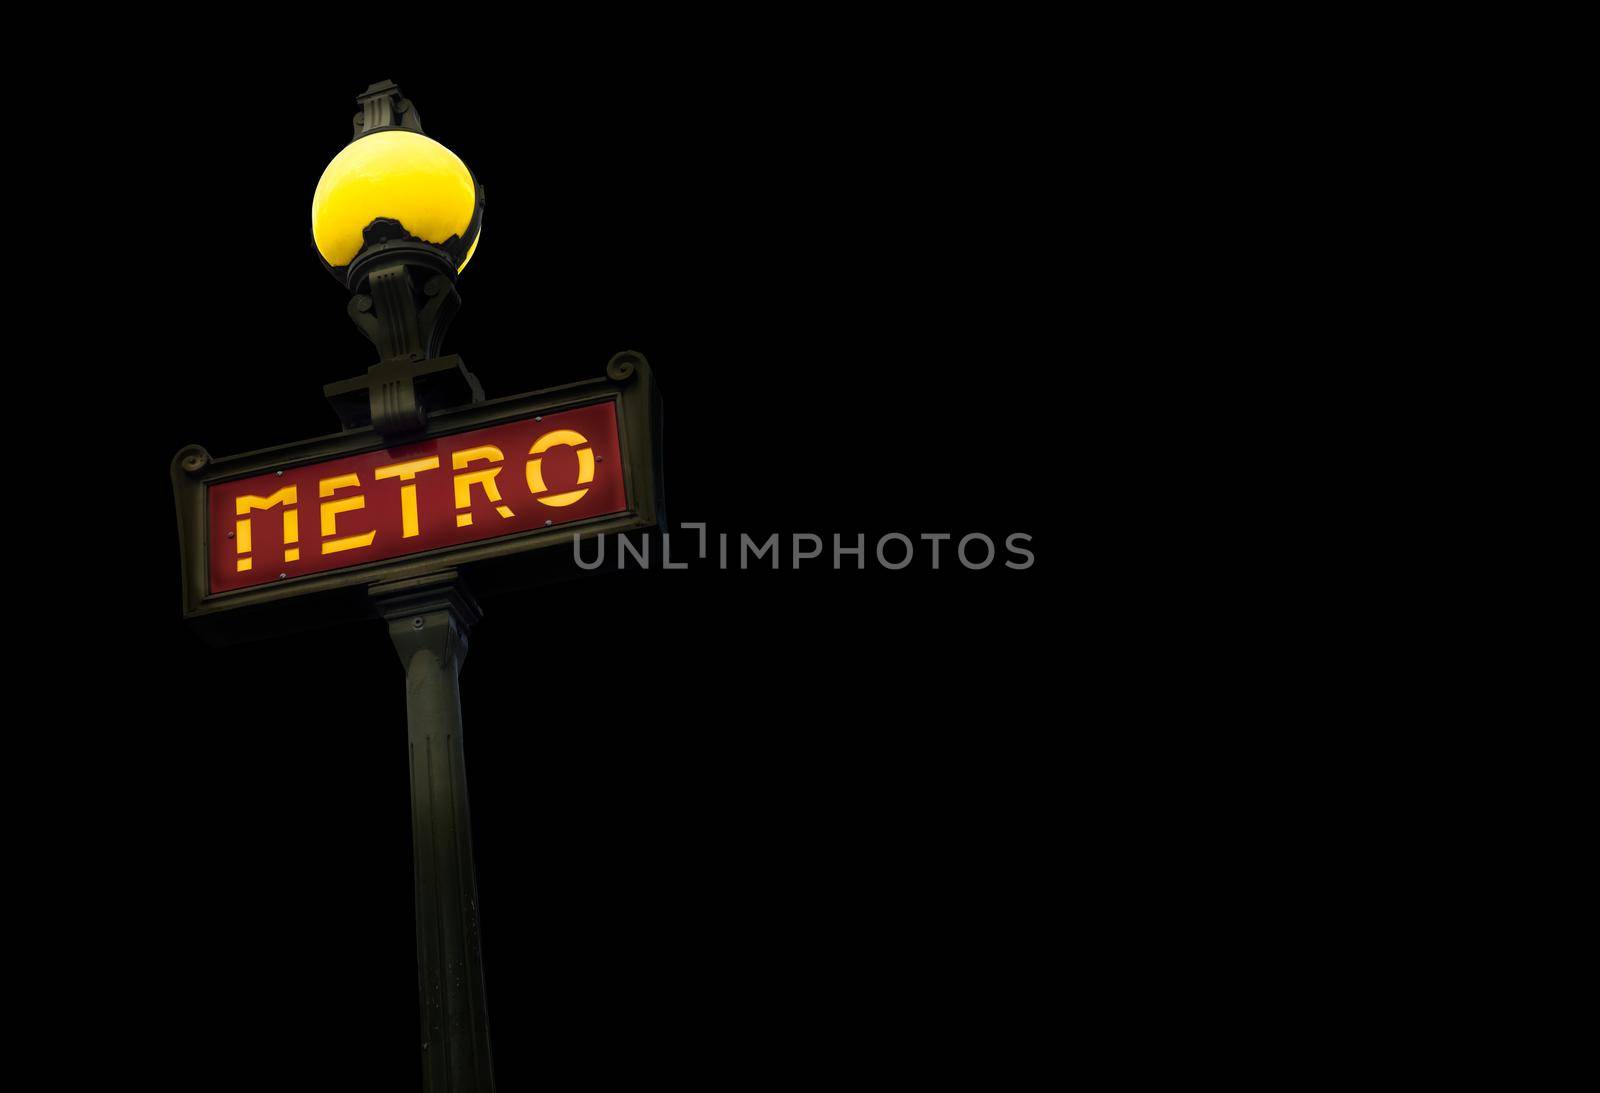 Vintage Metro Sign In France At Night, With Copy Space